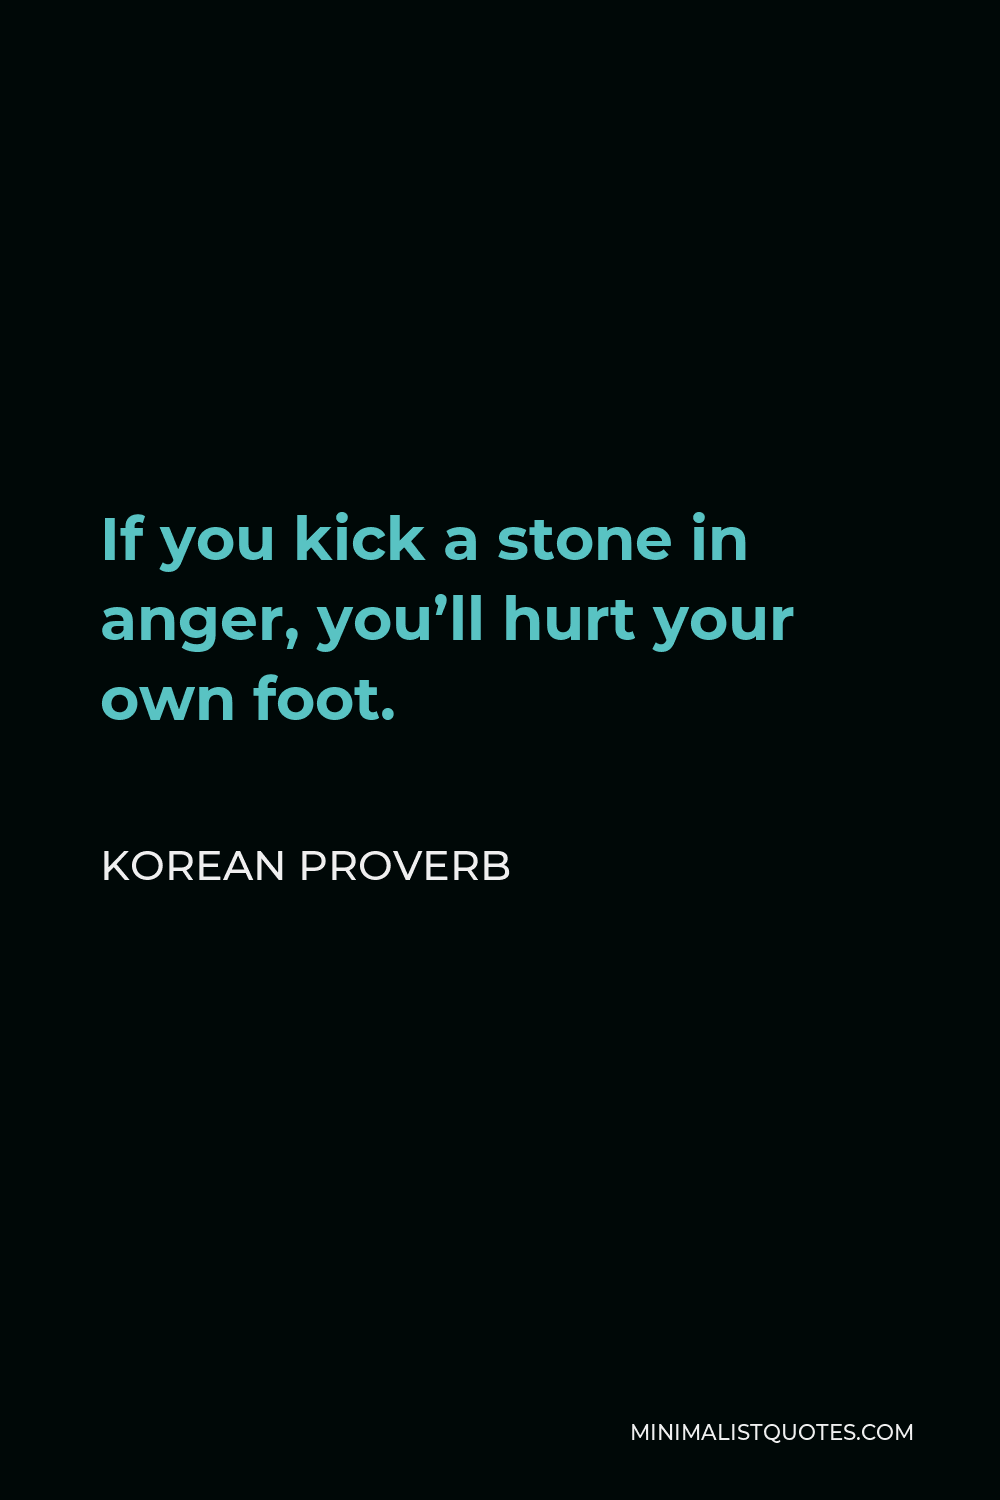 Korean Proverb Quote - If you kick a stone in anger, you’ll hurt your own foot.